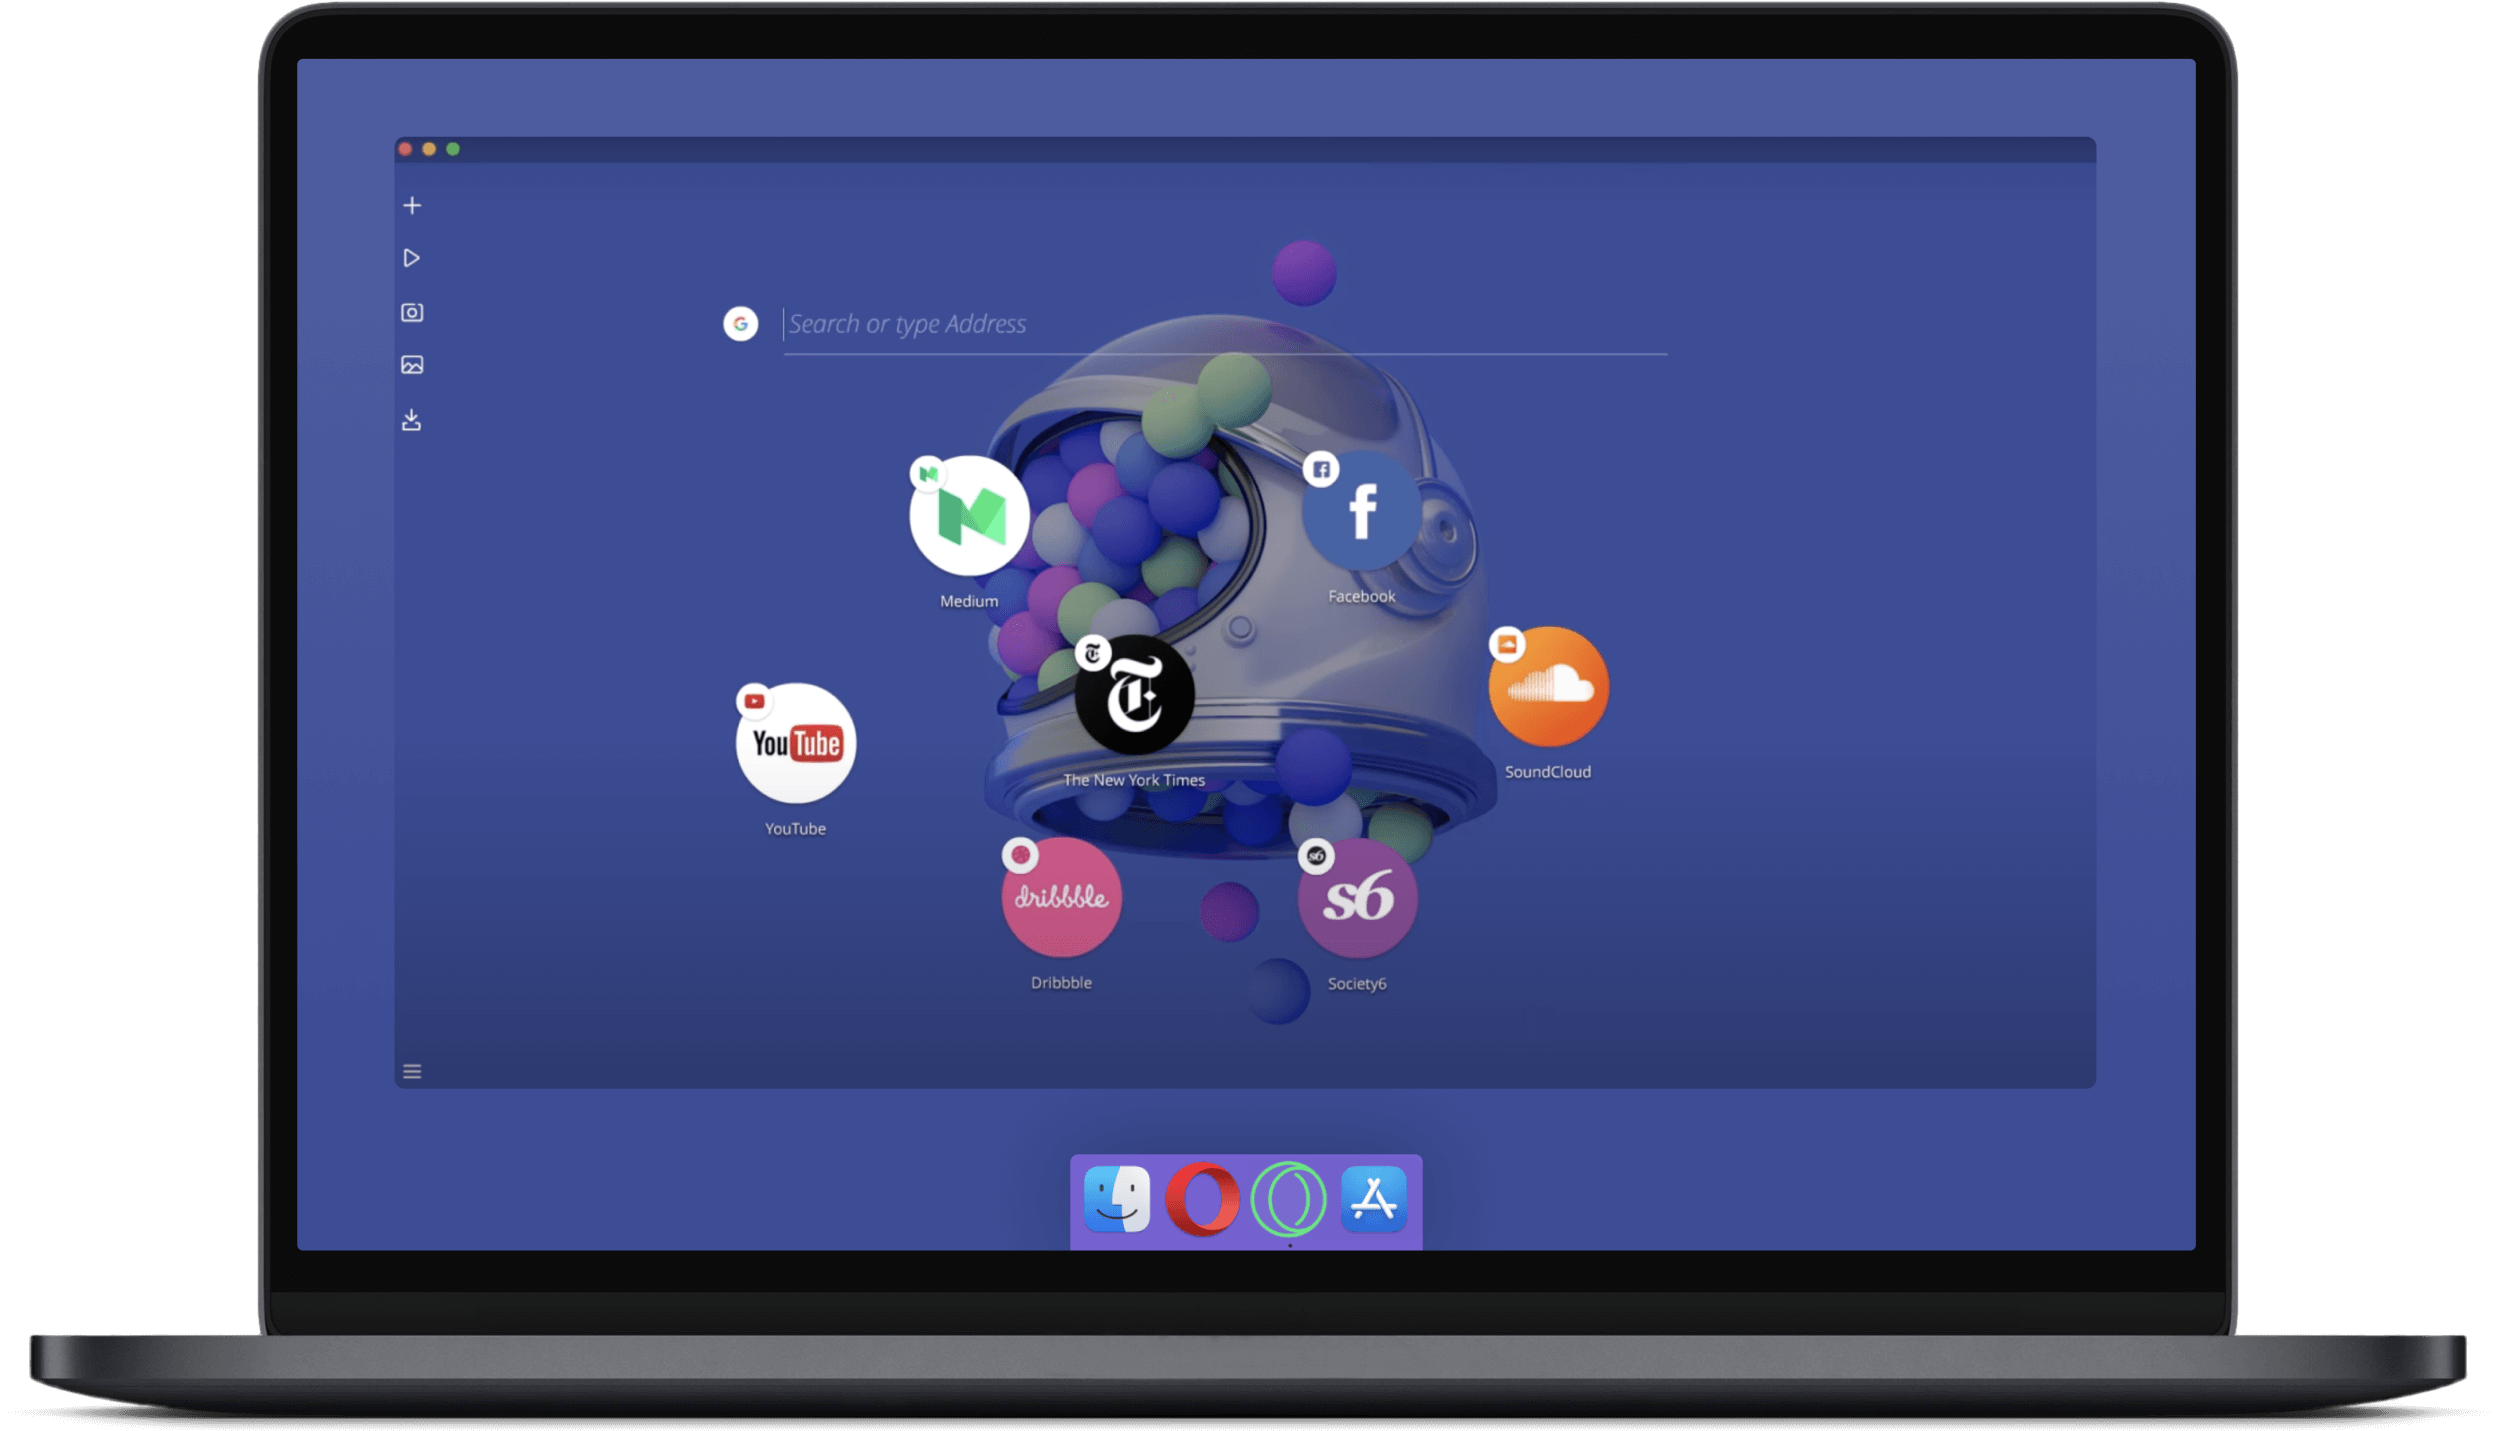 Screenshot of Opera web browser with a home screen containing large circle icons for websites